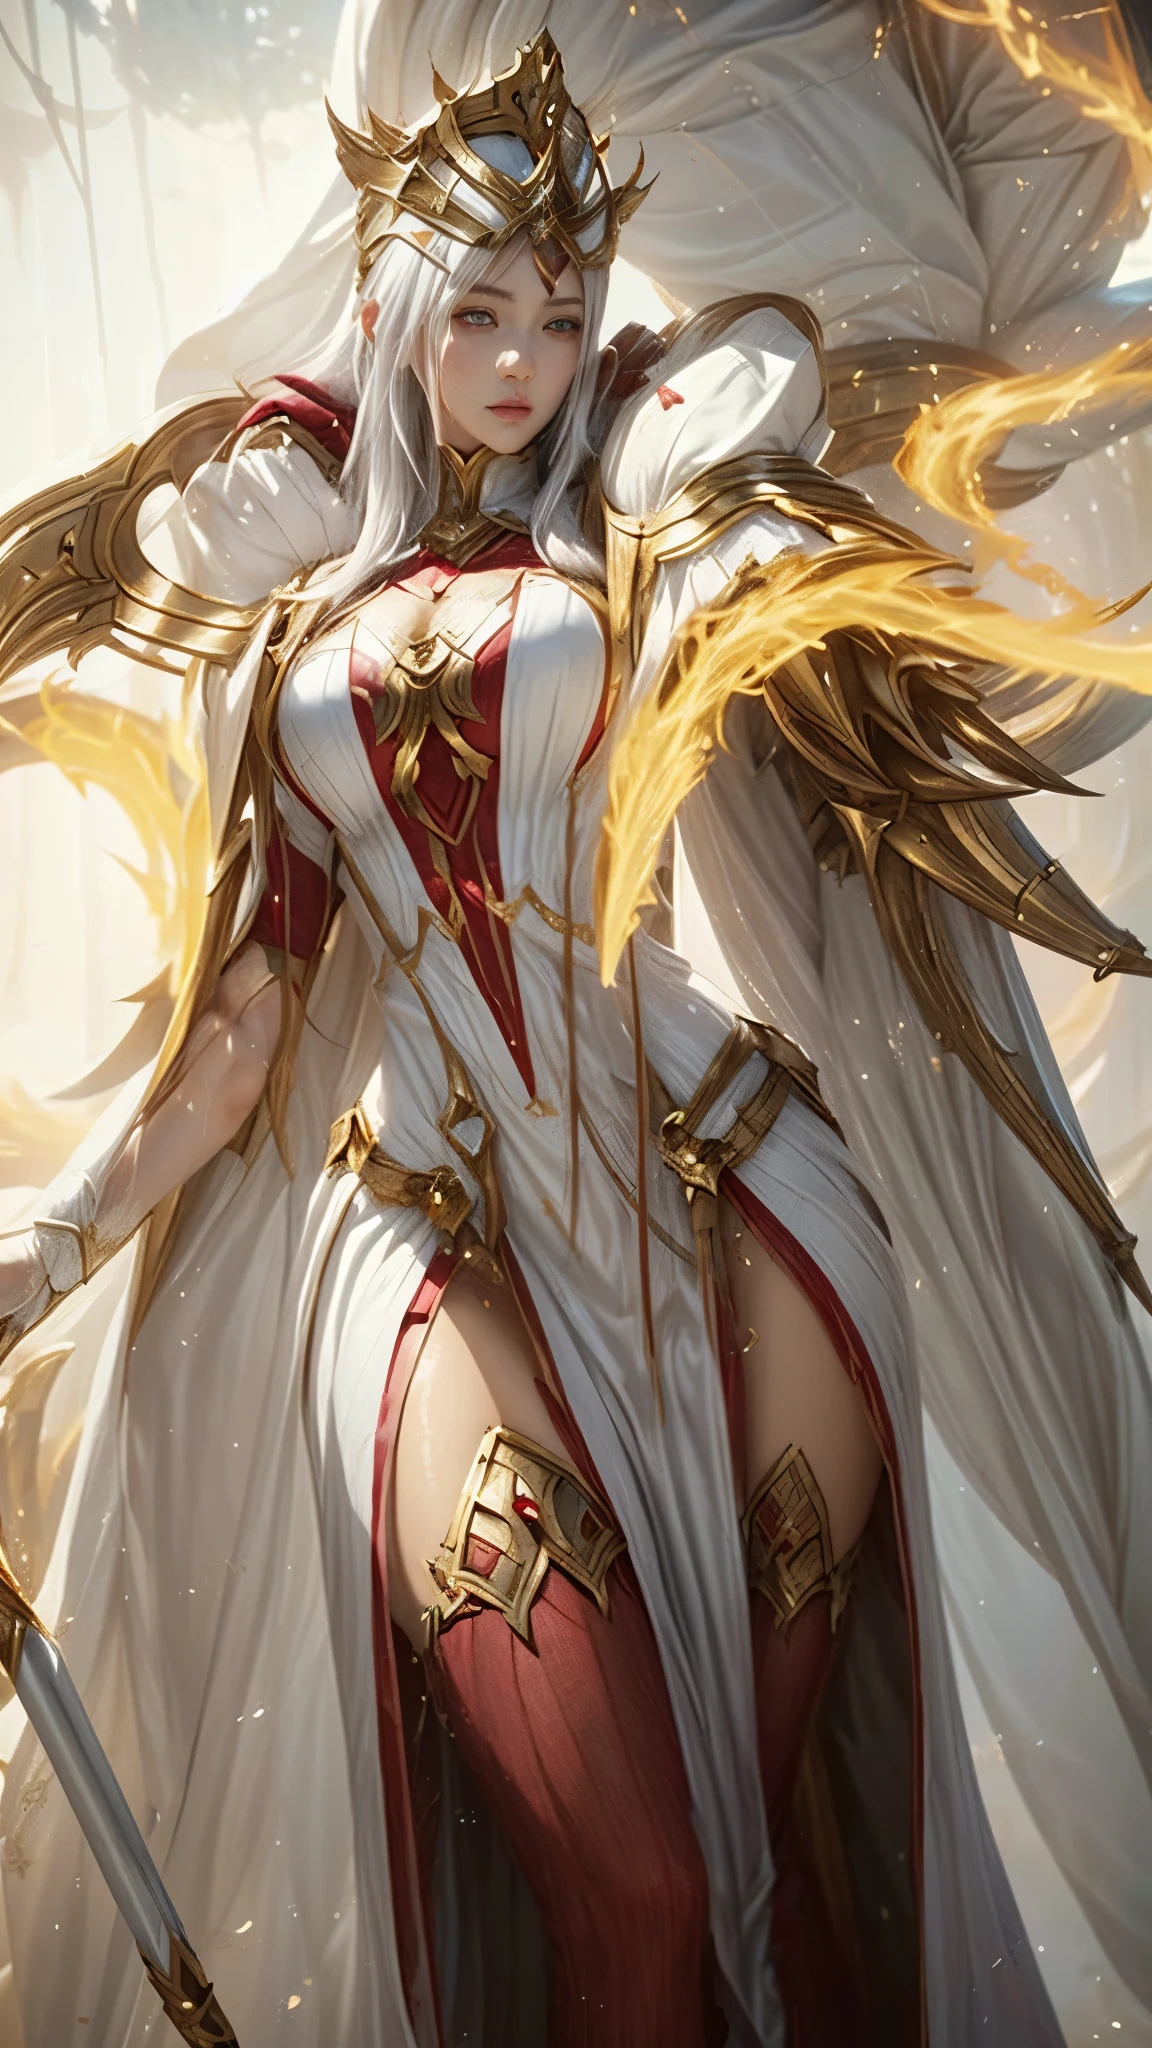 a close up of a woman in a white and red outfit holding a magic Wand, irelia, irelia from league of legends, extremely detailed artgerm, white and gold priestess robes, ig model | artgerm, inspired by Leona Wood, style artgerm, style league of legends, fiora from league of legends